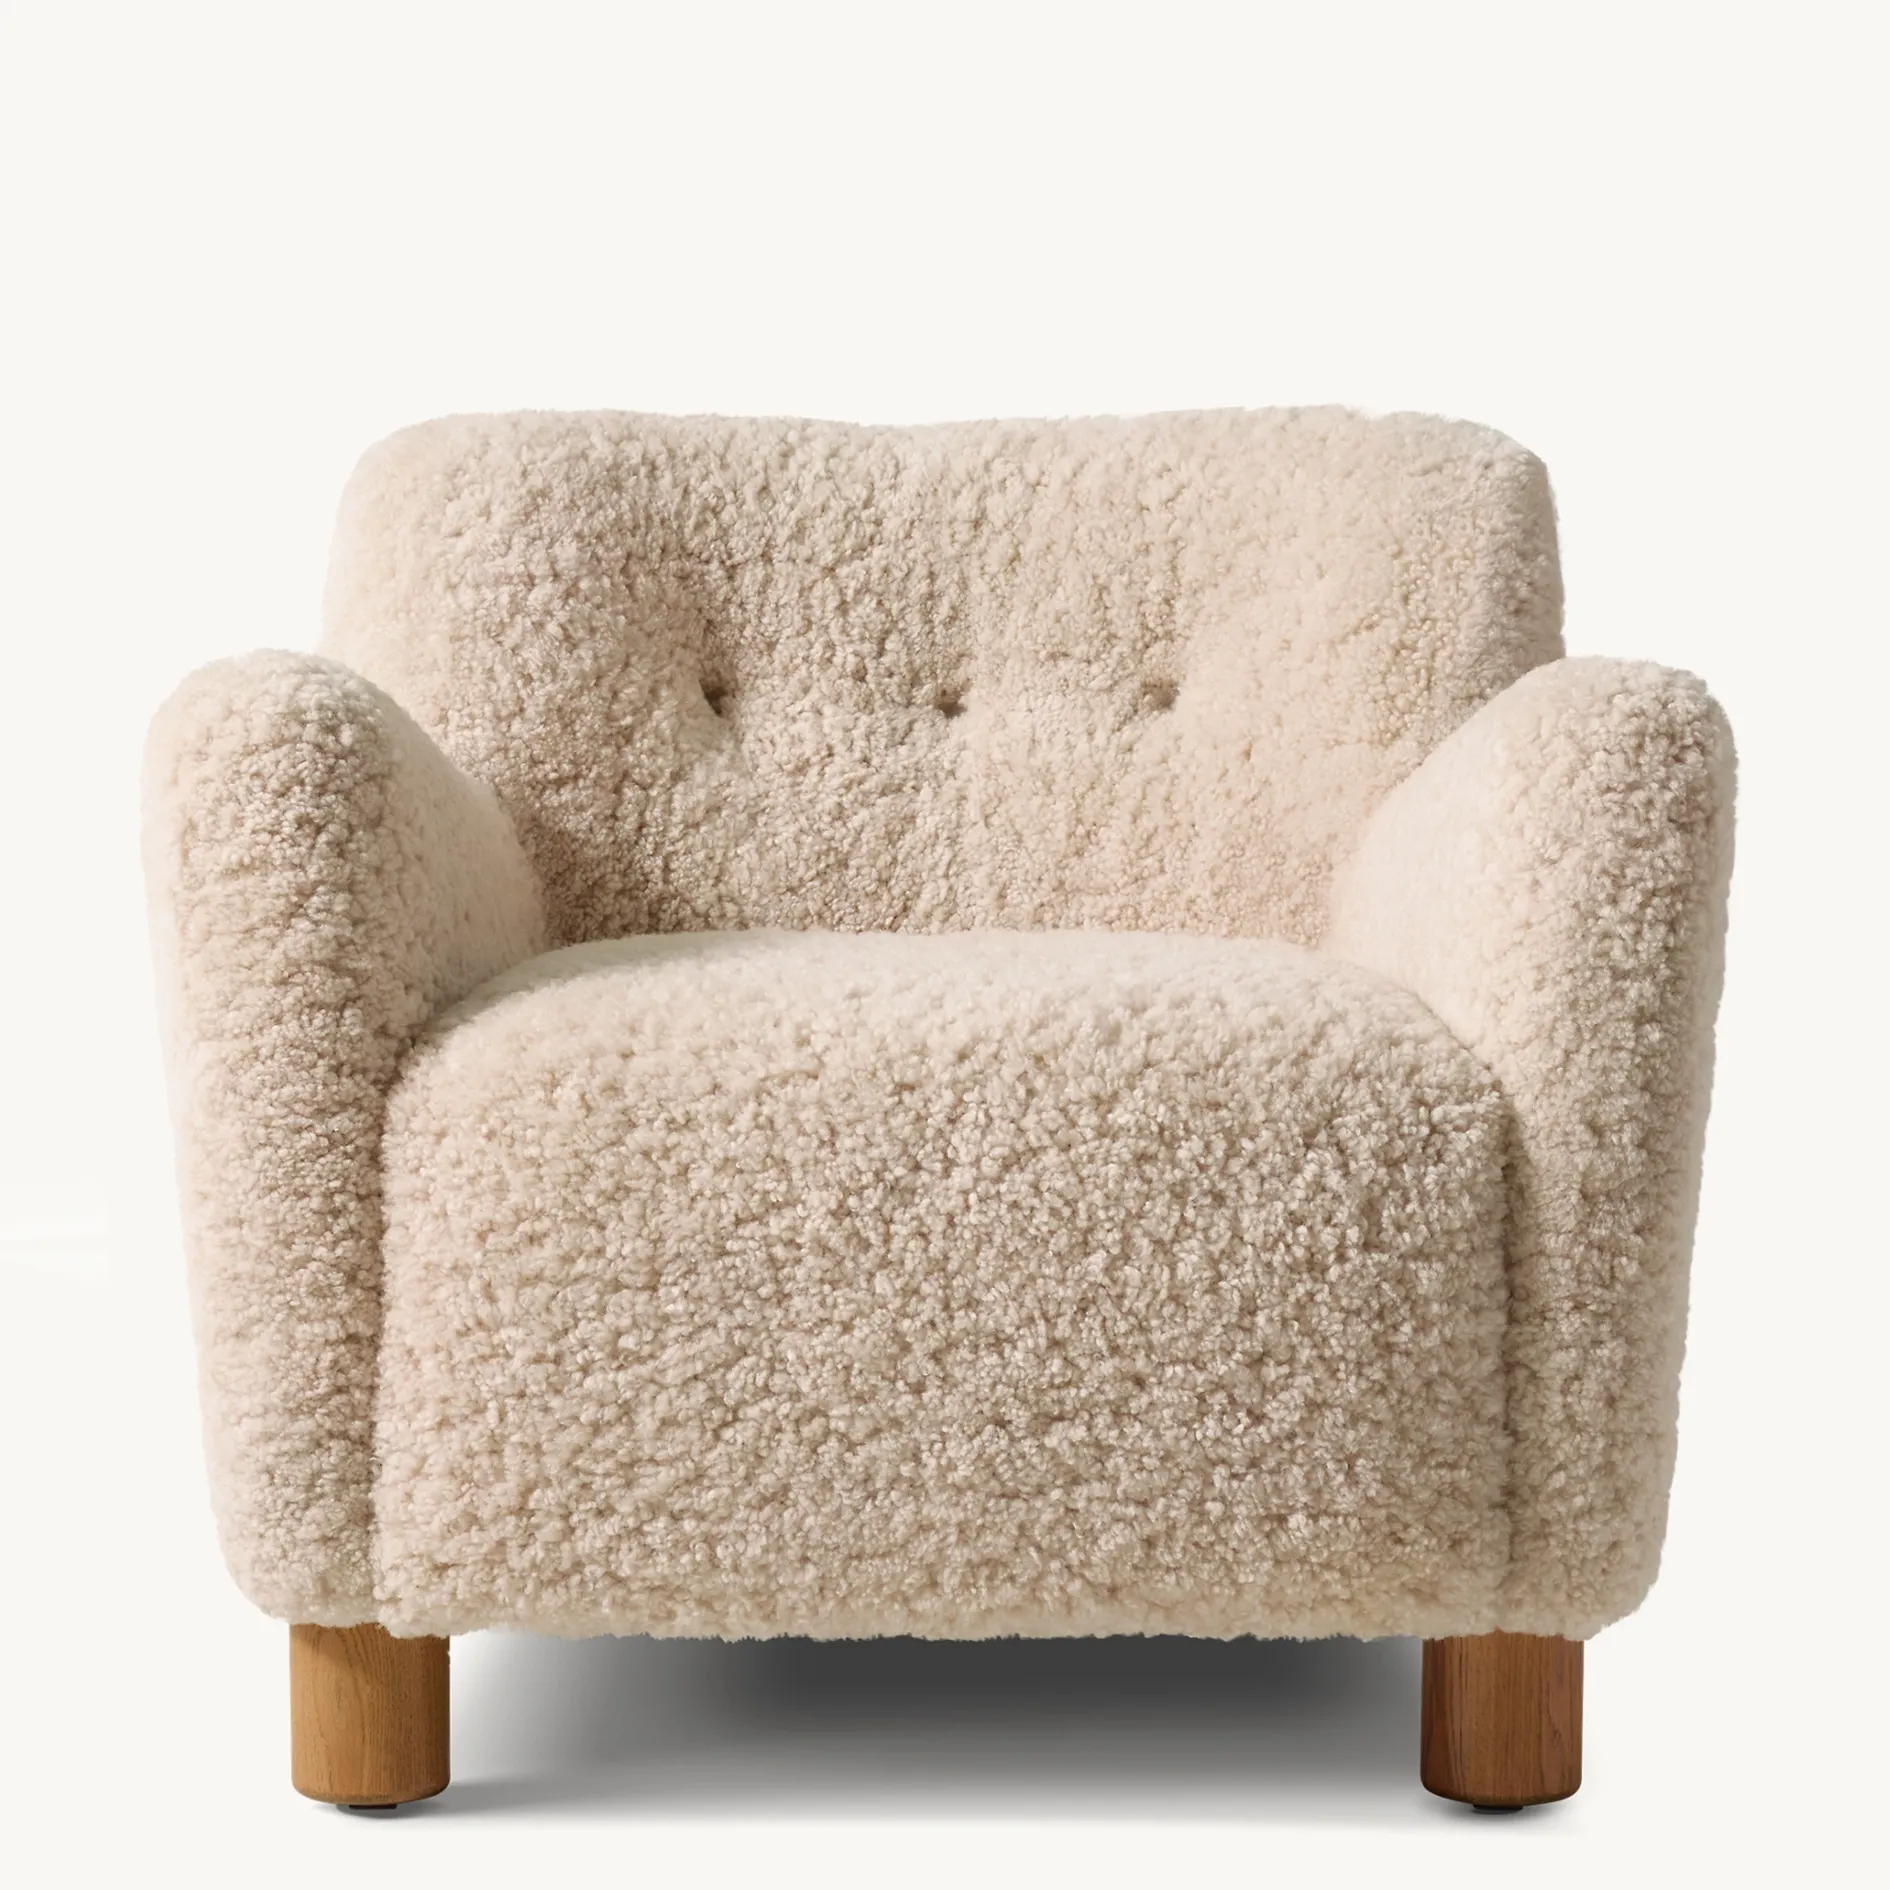 Handcrafted living room lounge modern furniture shearling wool luxury single sofa chair design